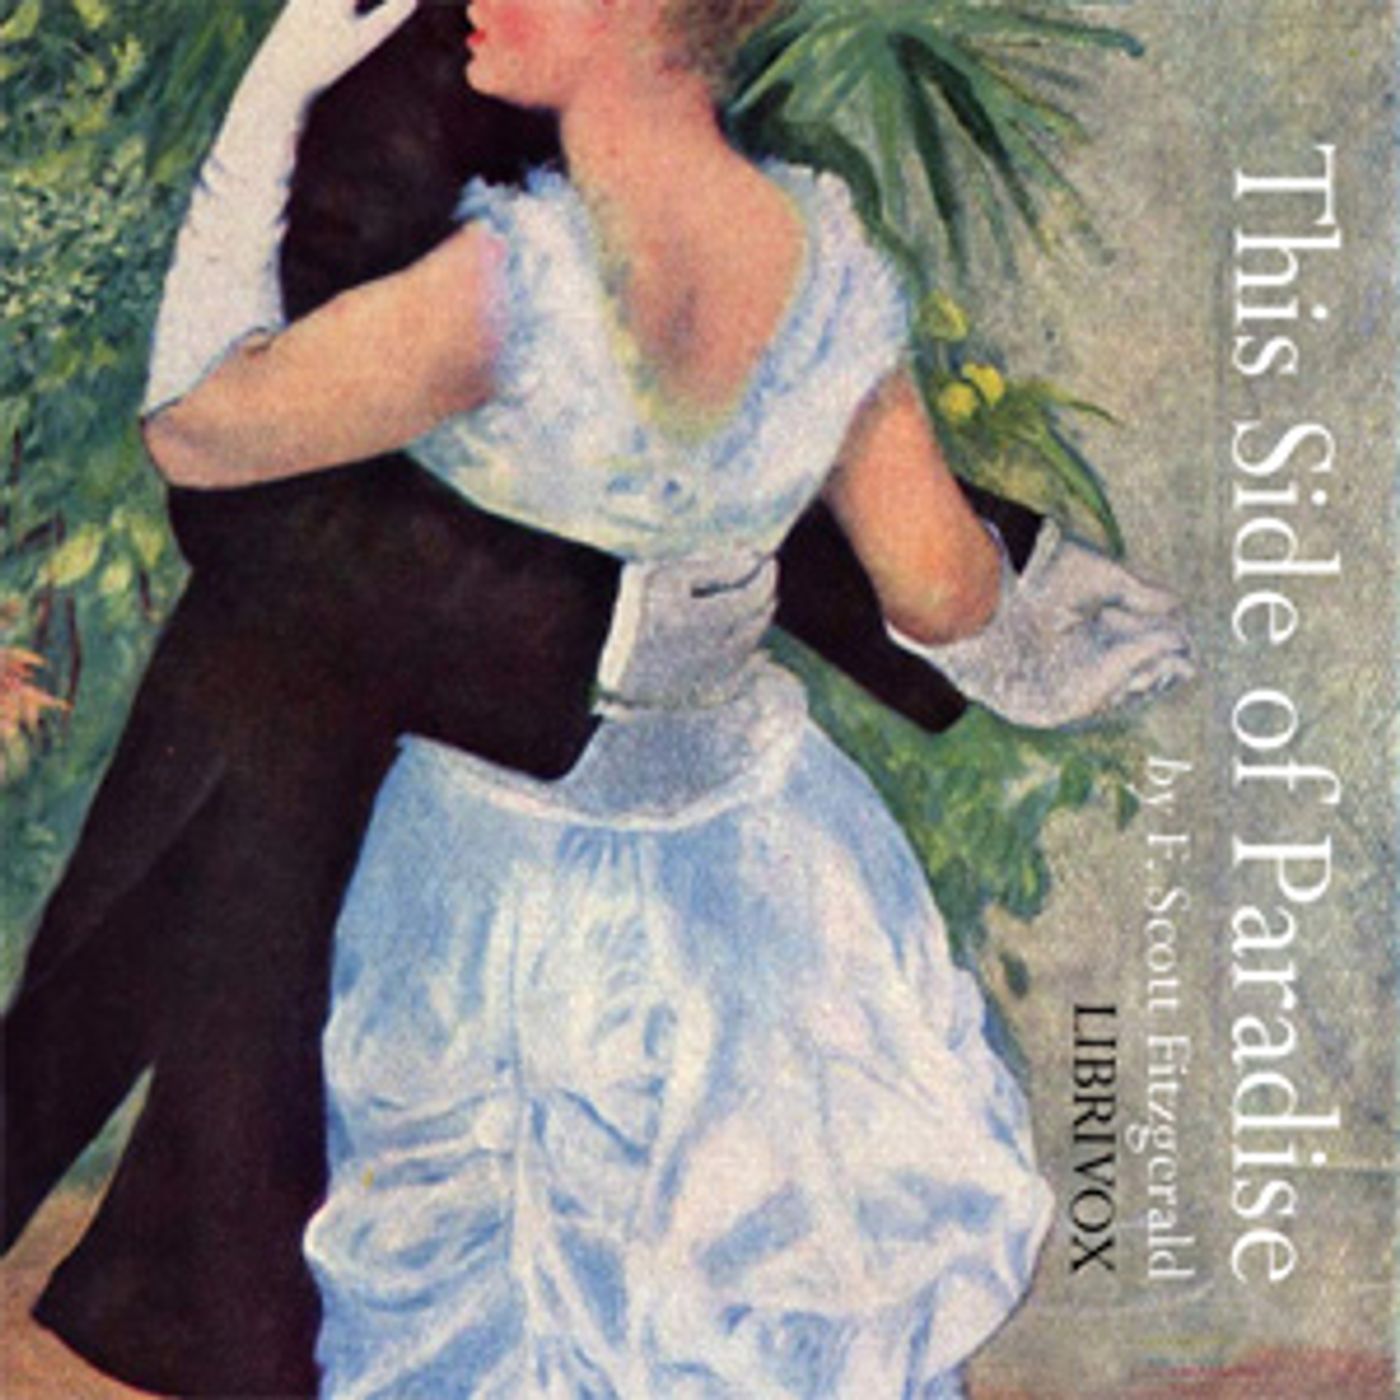 This Side of Paradise by F. Scott Fitzgerald (1896 – 1940)